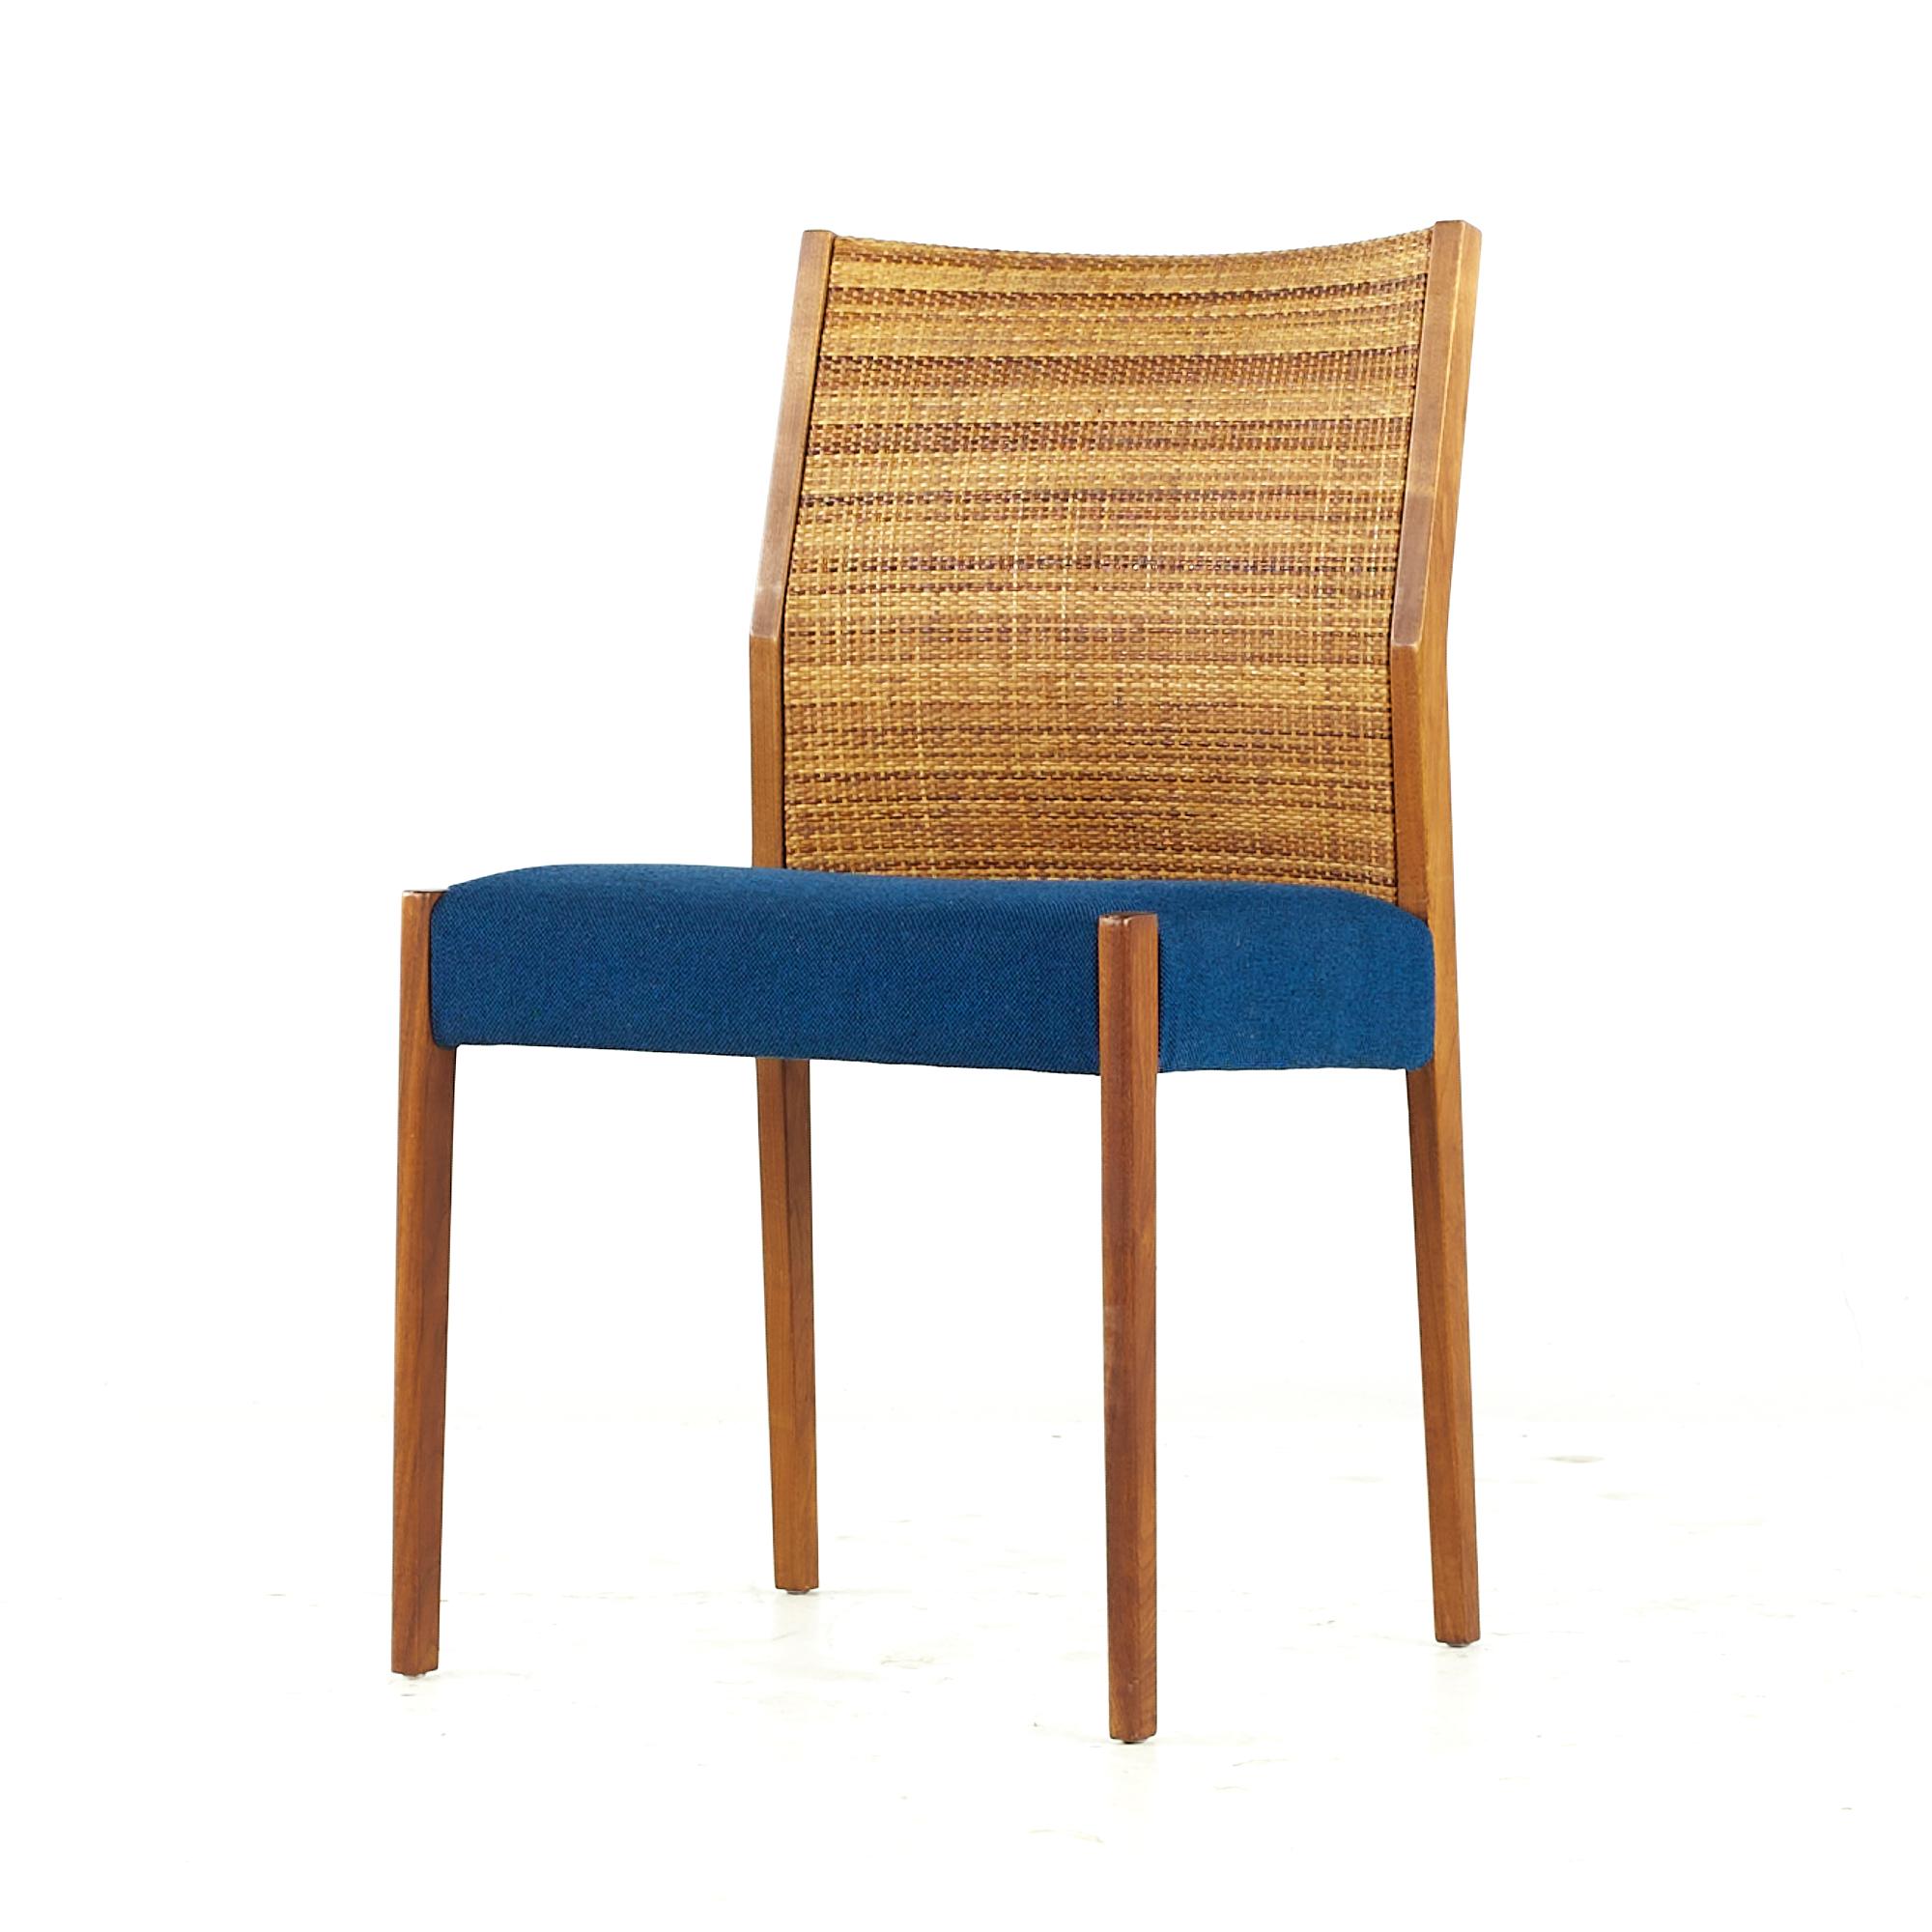 Late 20th Century Jens Risom Midcentury Cane and Walnut Dining Chairs, Set of 6 For Sale